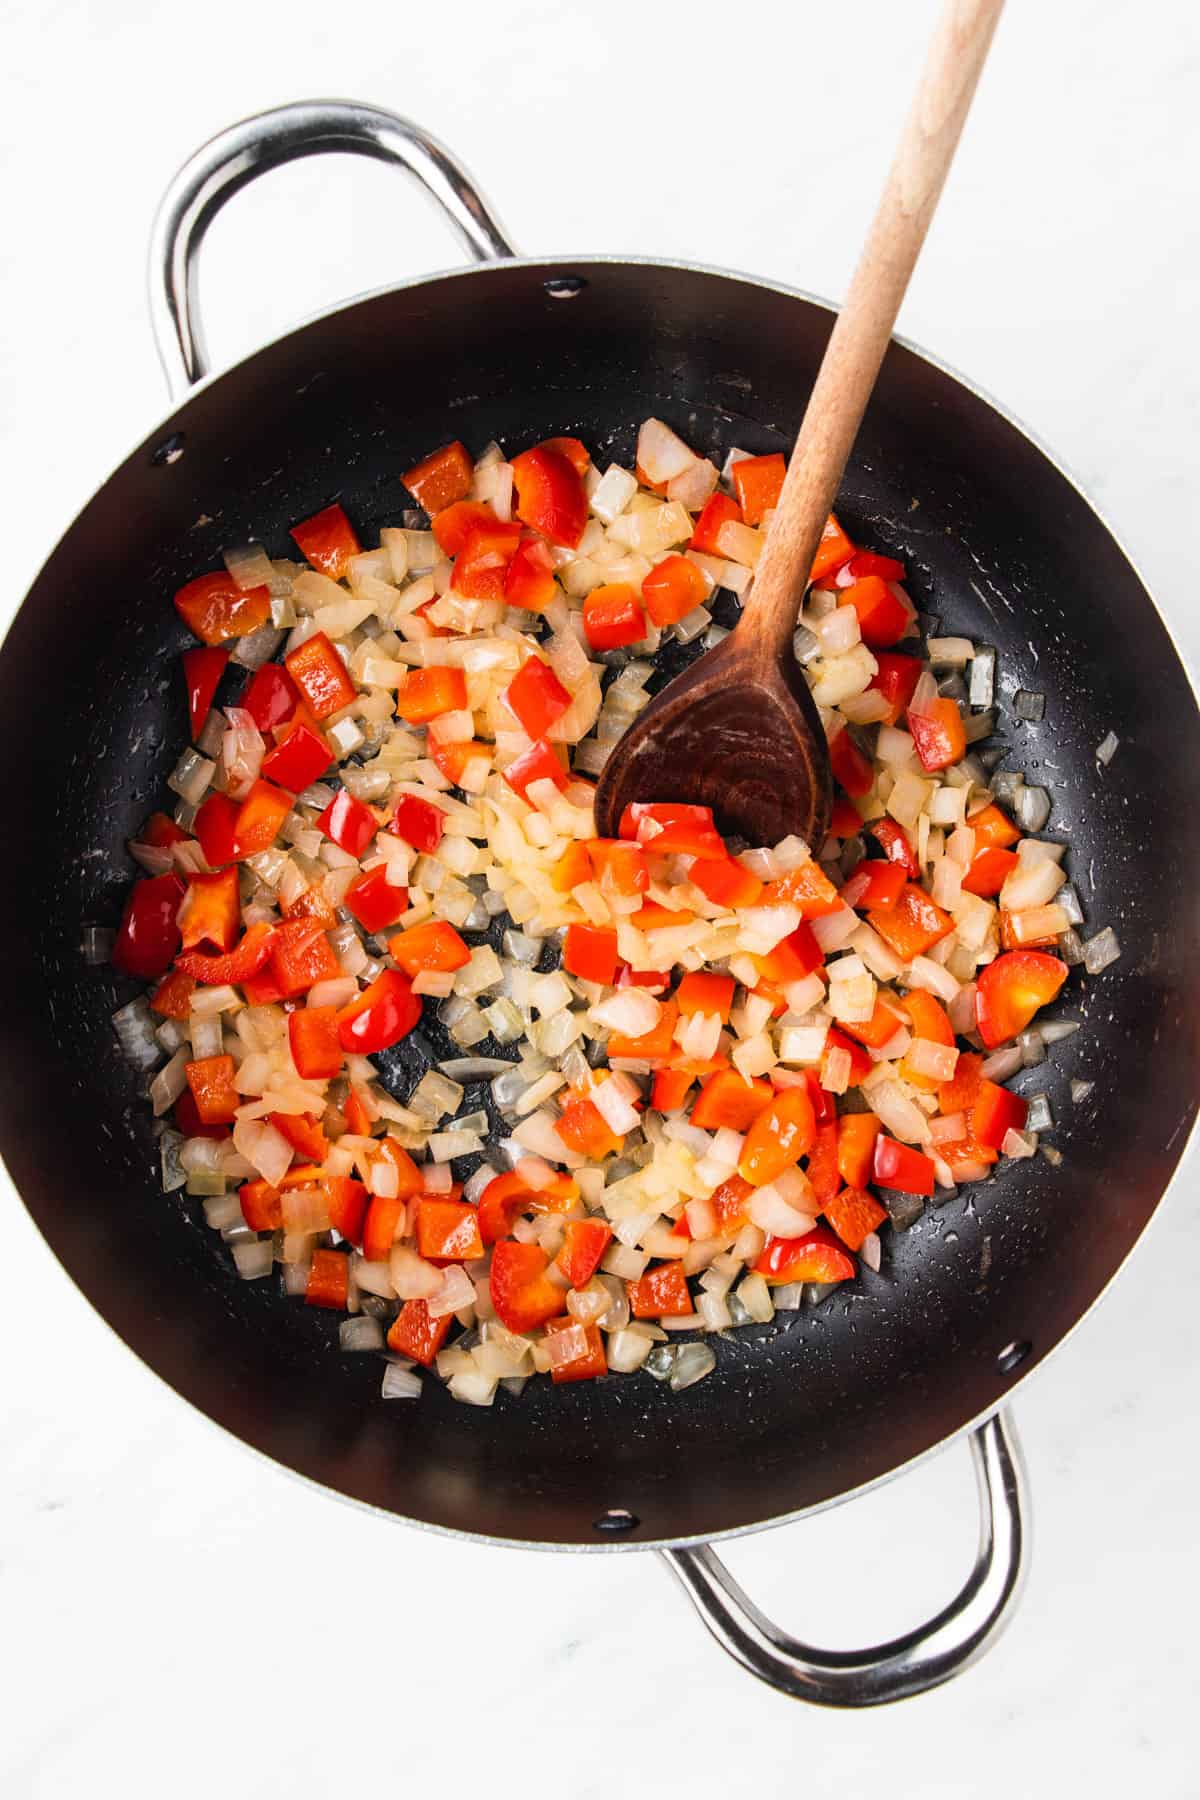 Diced red bell pepper and onions being sauteed in a large pot.